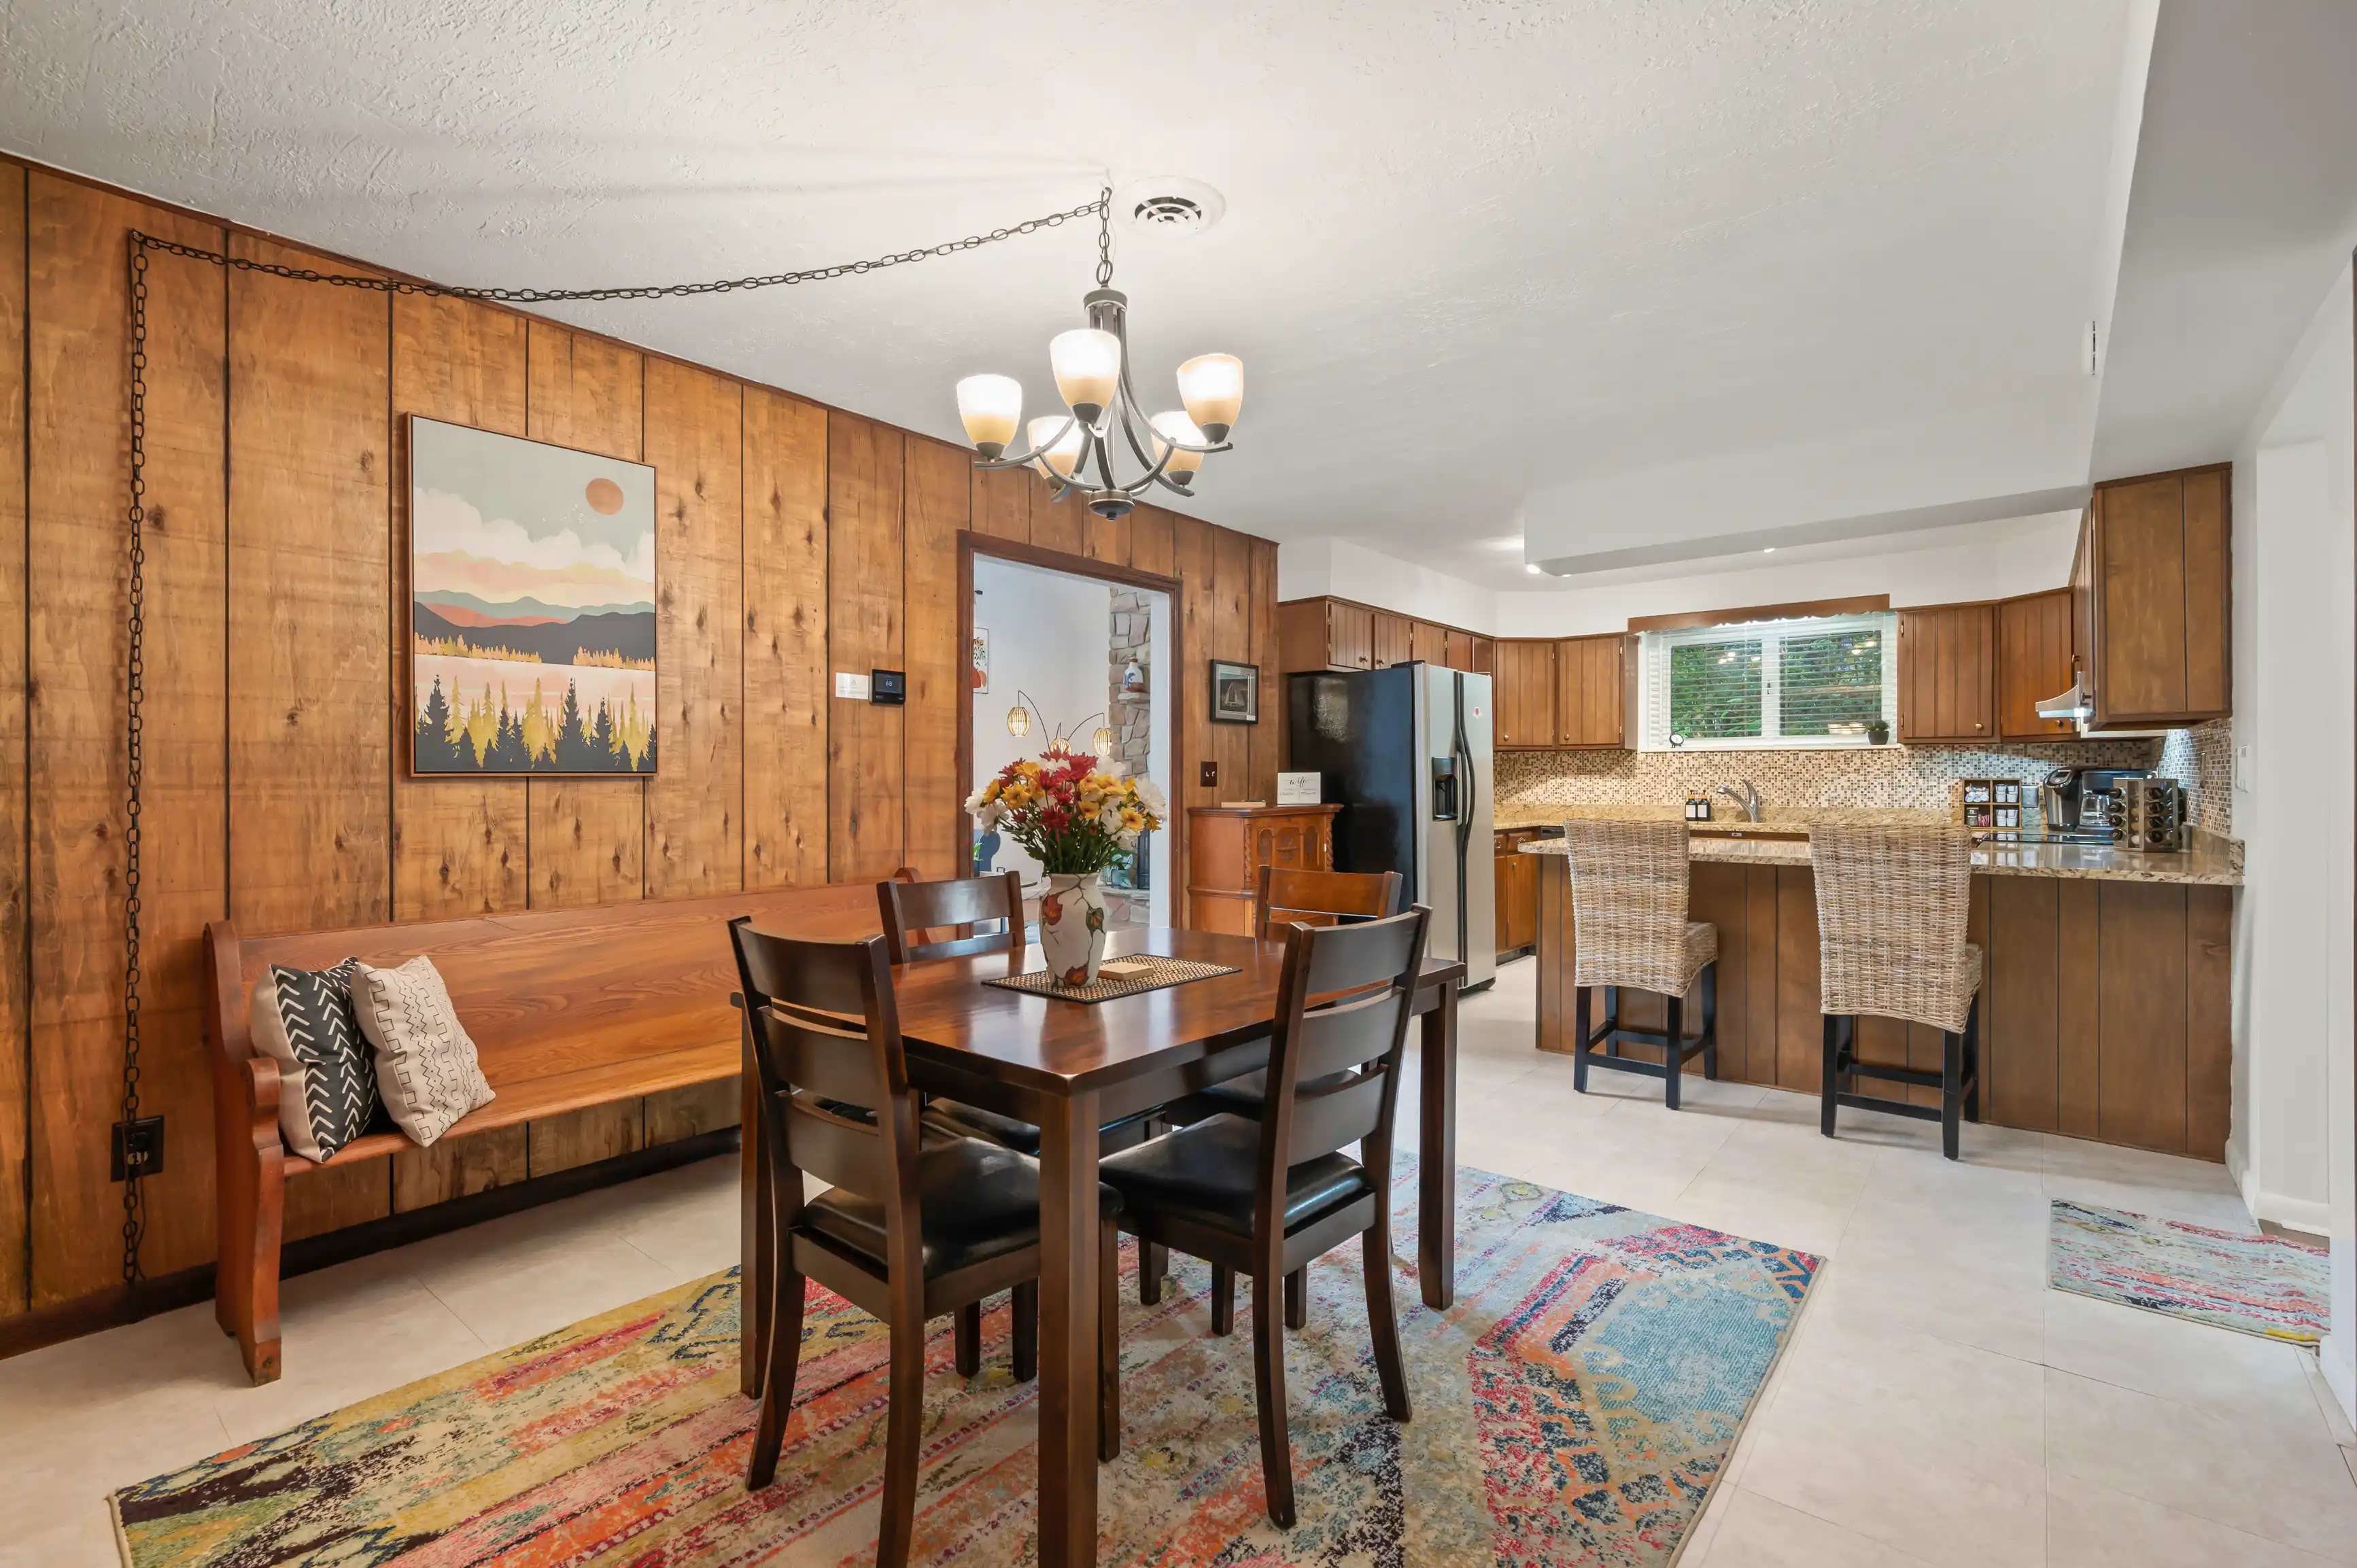 A cozy dining area with a wooden table and chairs on a colorful rug, adjacent to a kitchen with wooden cabinetry and modern appliances. A scenic landscape painting adorns the wood-paneled wall.